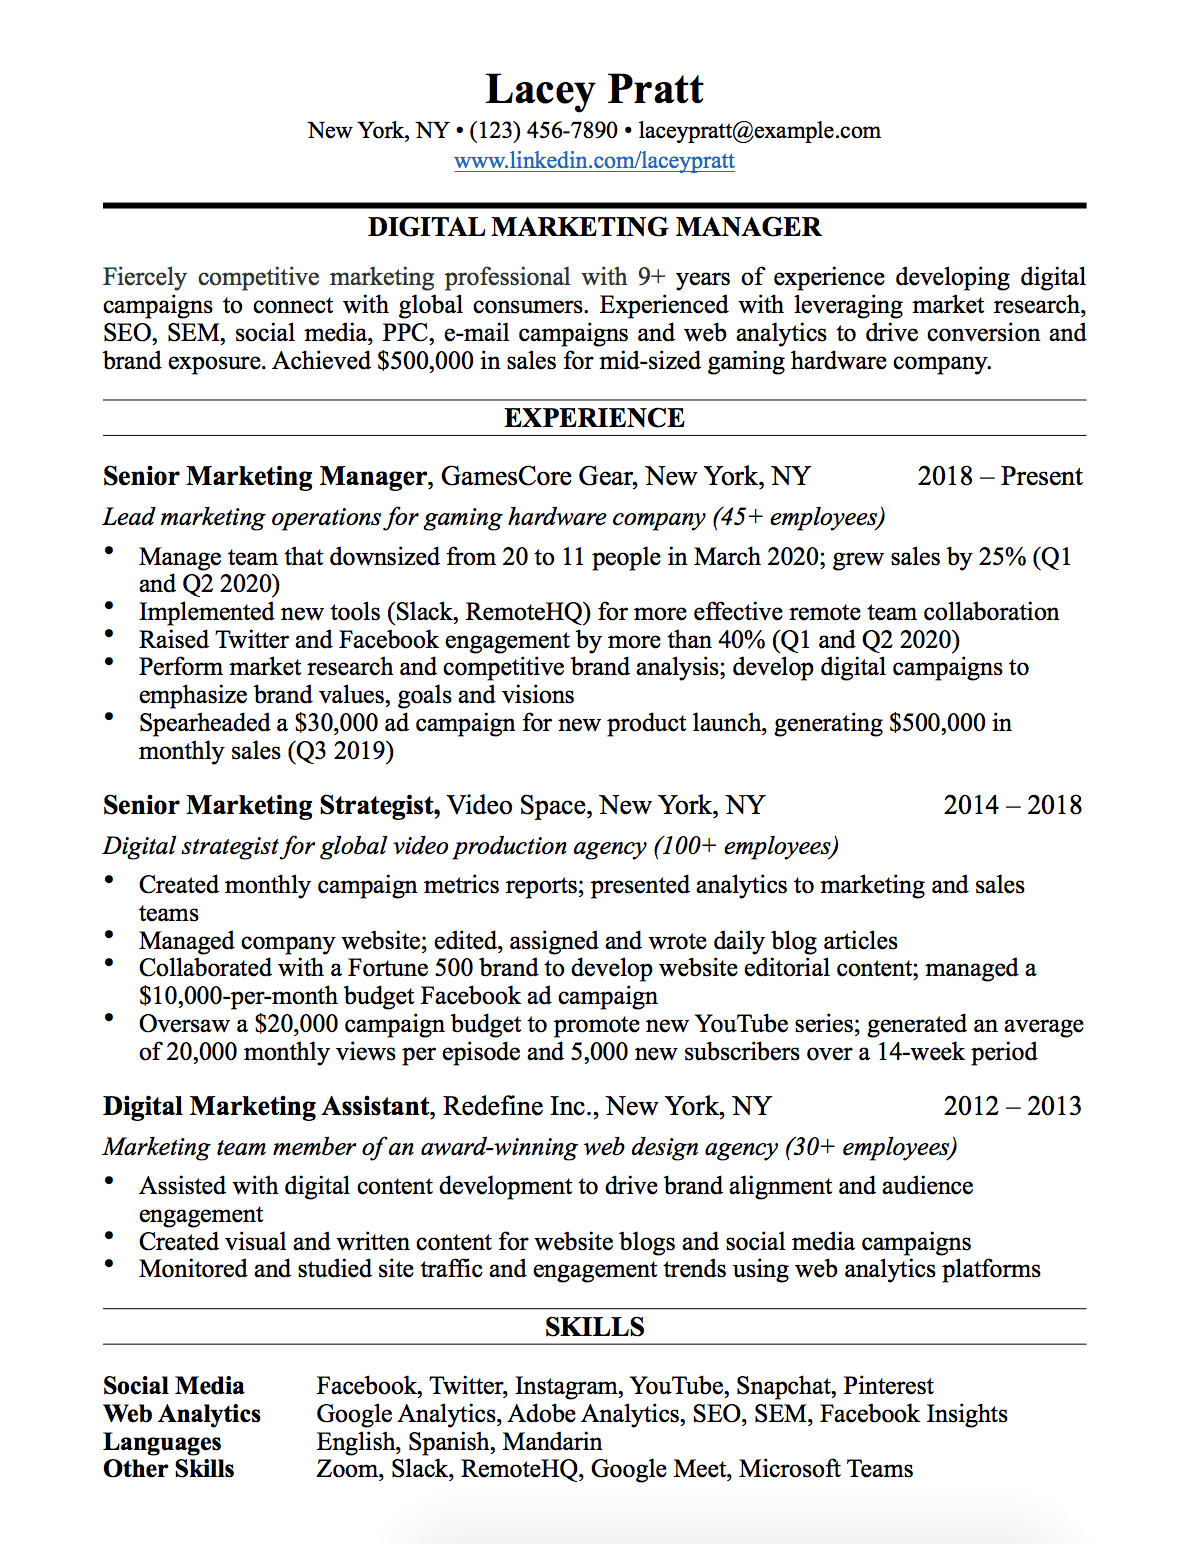 I create resume templates for a living. Here's the best example ...